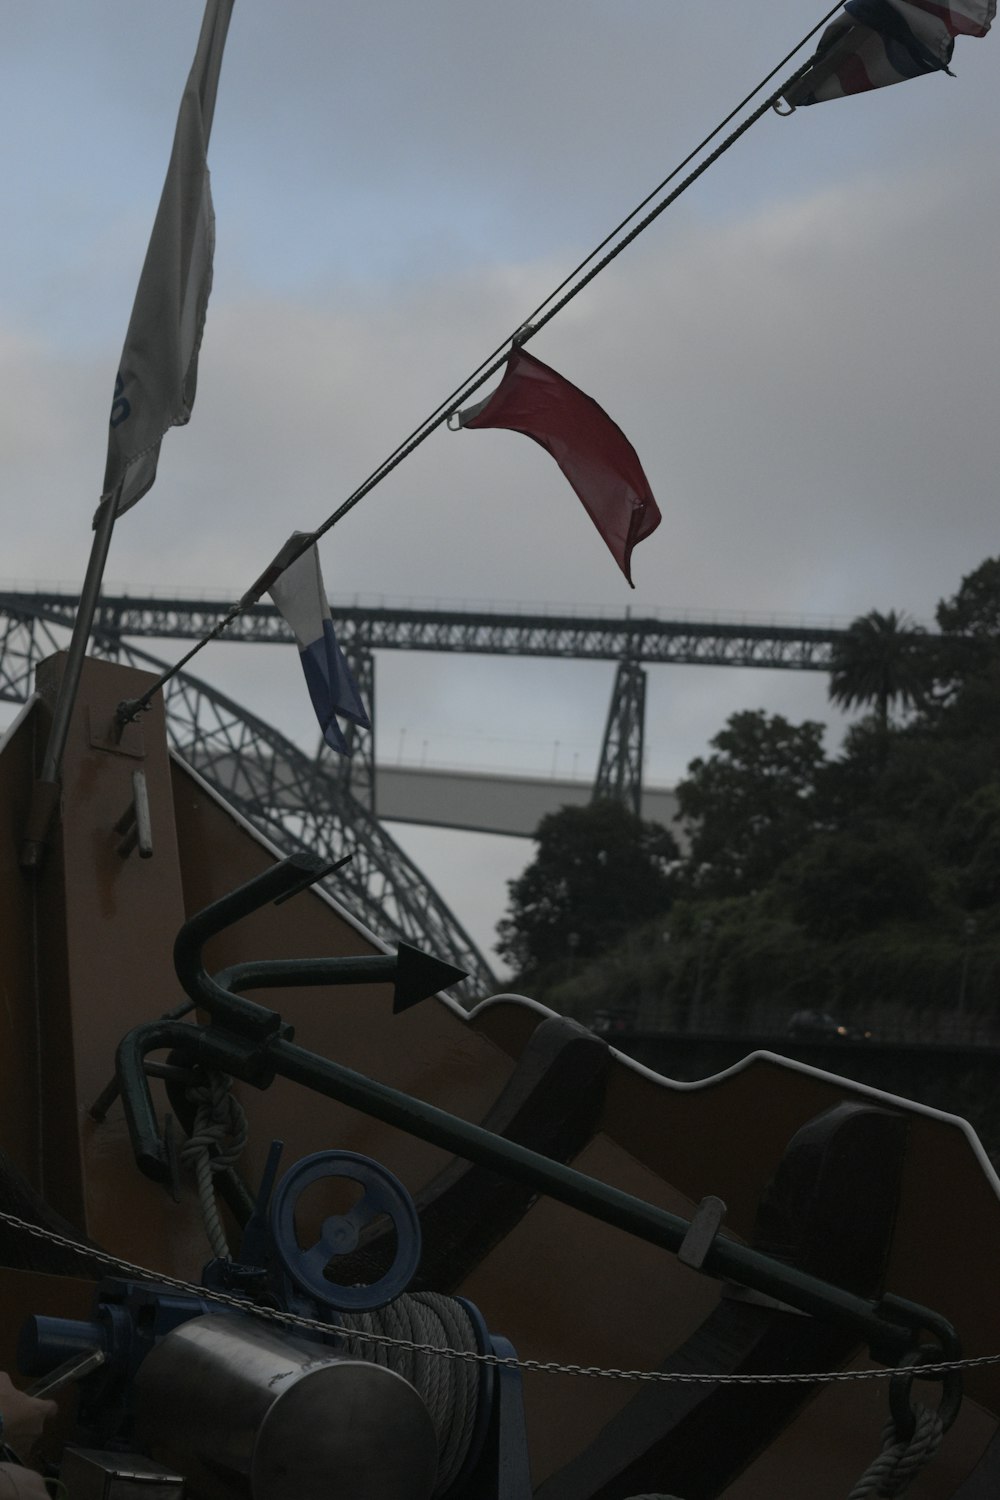 a boat with two flags on it and a bridge in the background